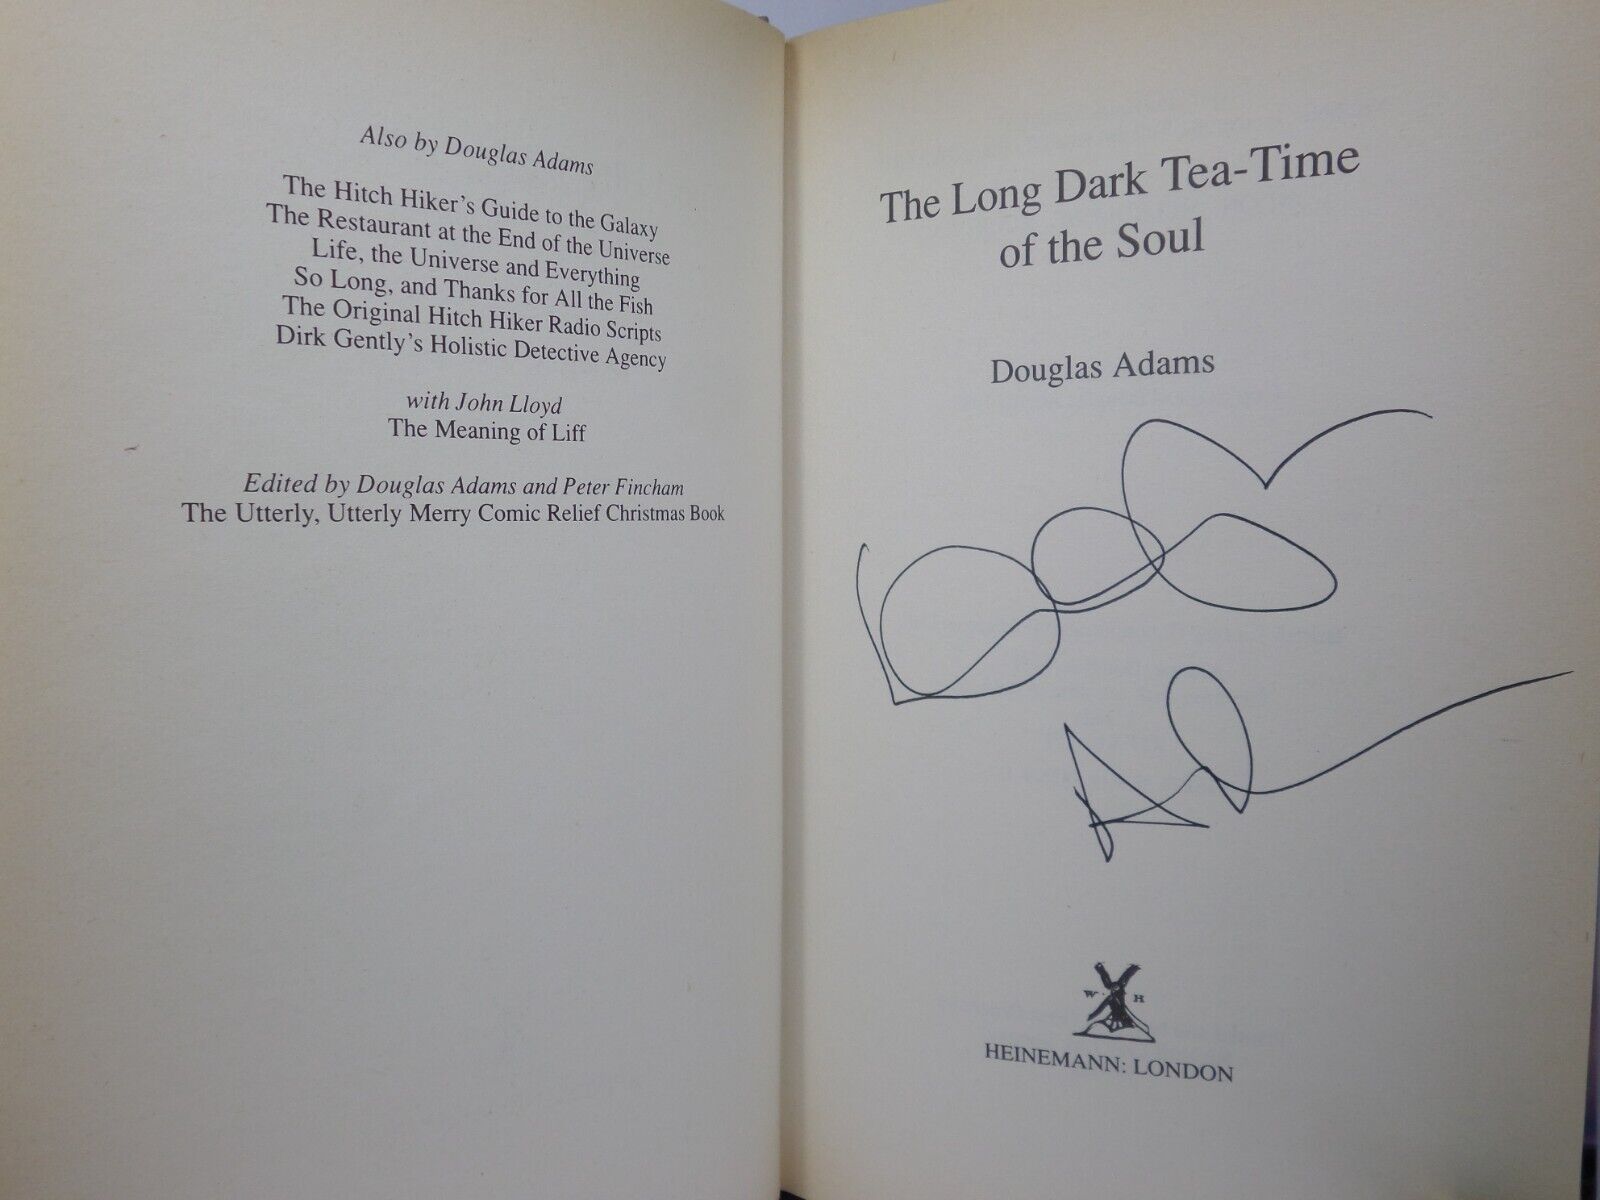 THE LONG DARK TEA-TIME OF THE SOUL BY DOUGLAS ADAMS 1988 SIGNED FIRST EDITION